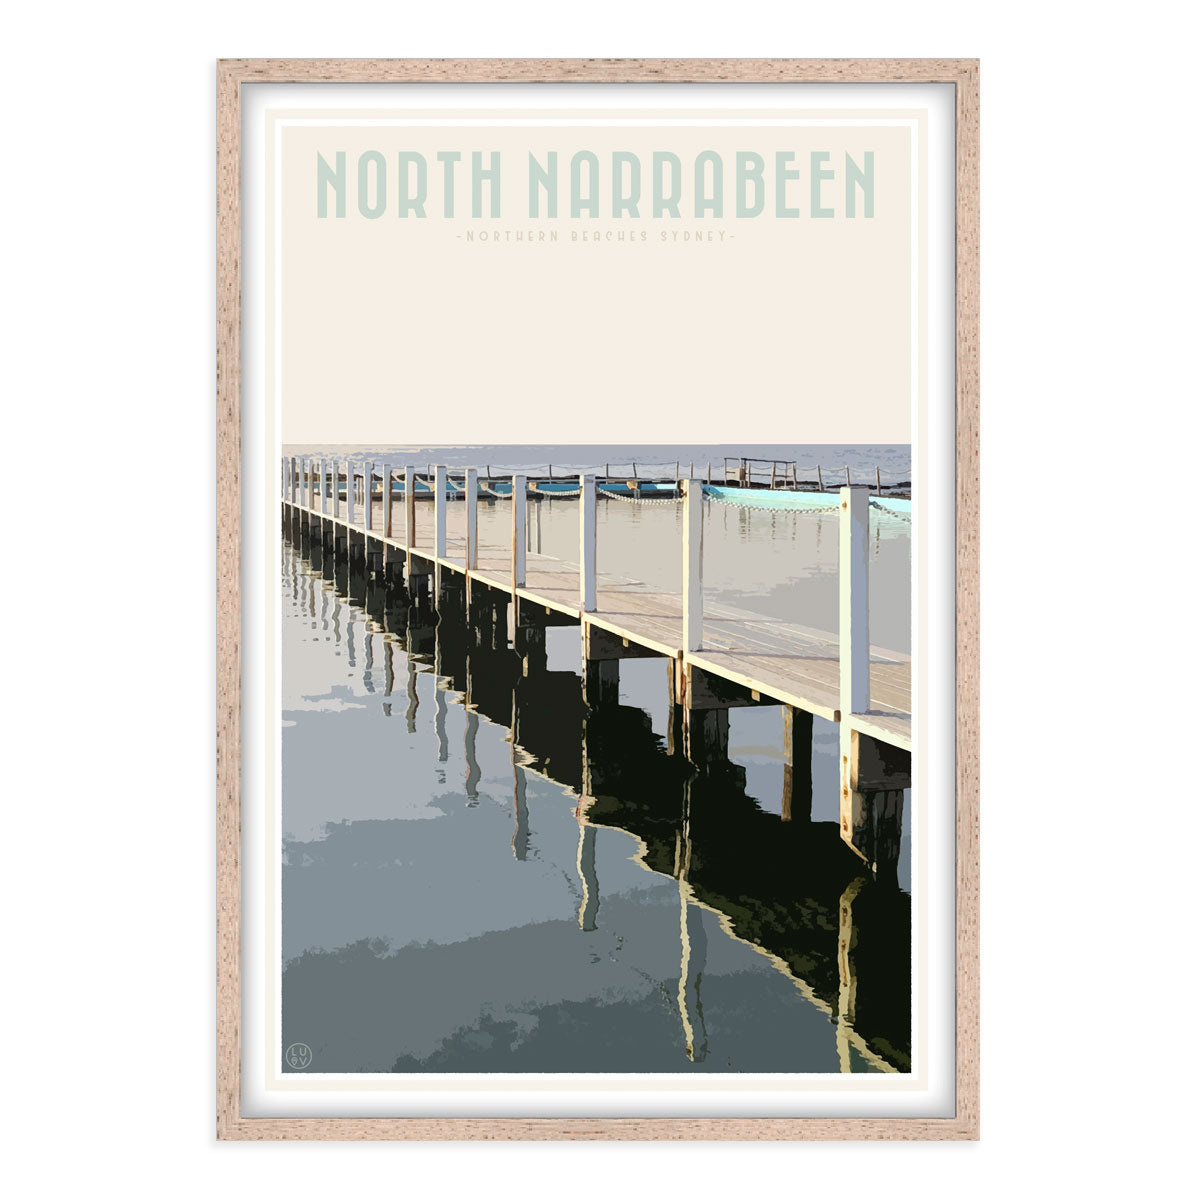 North Narrabeen vintage travel style oak framed print by Places We Luv